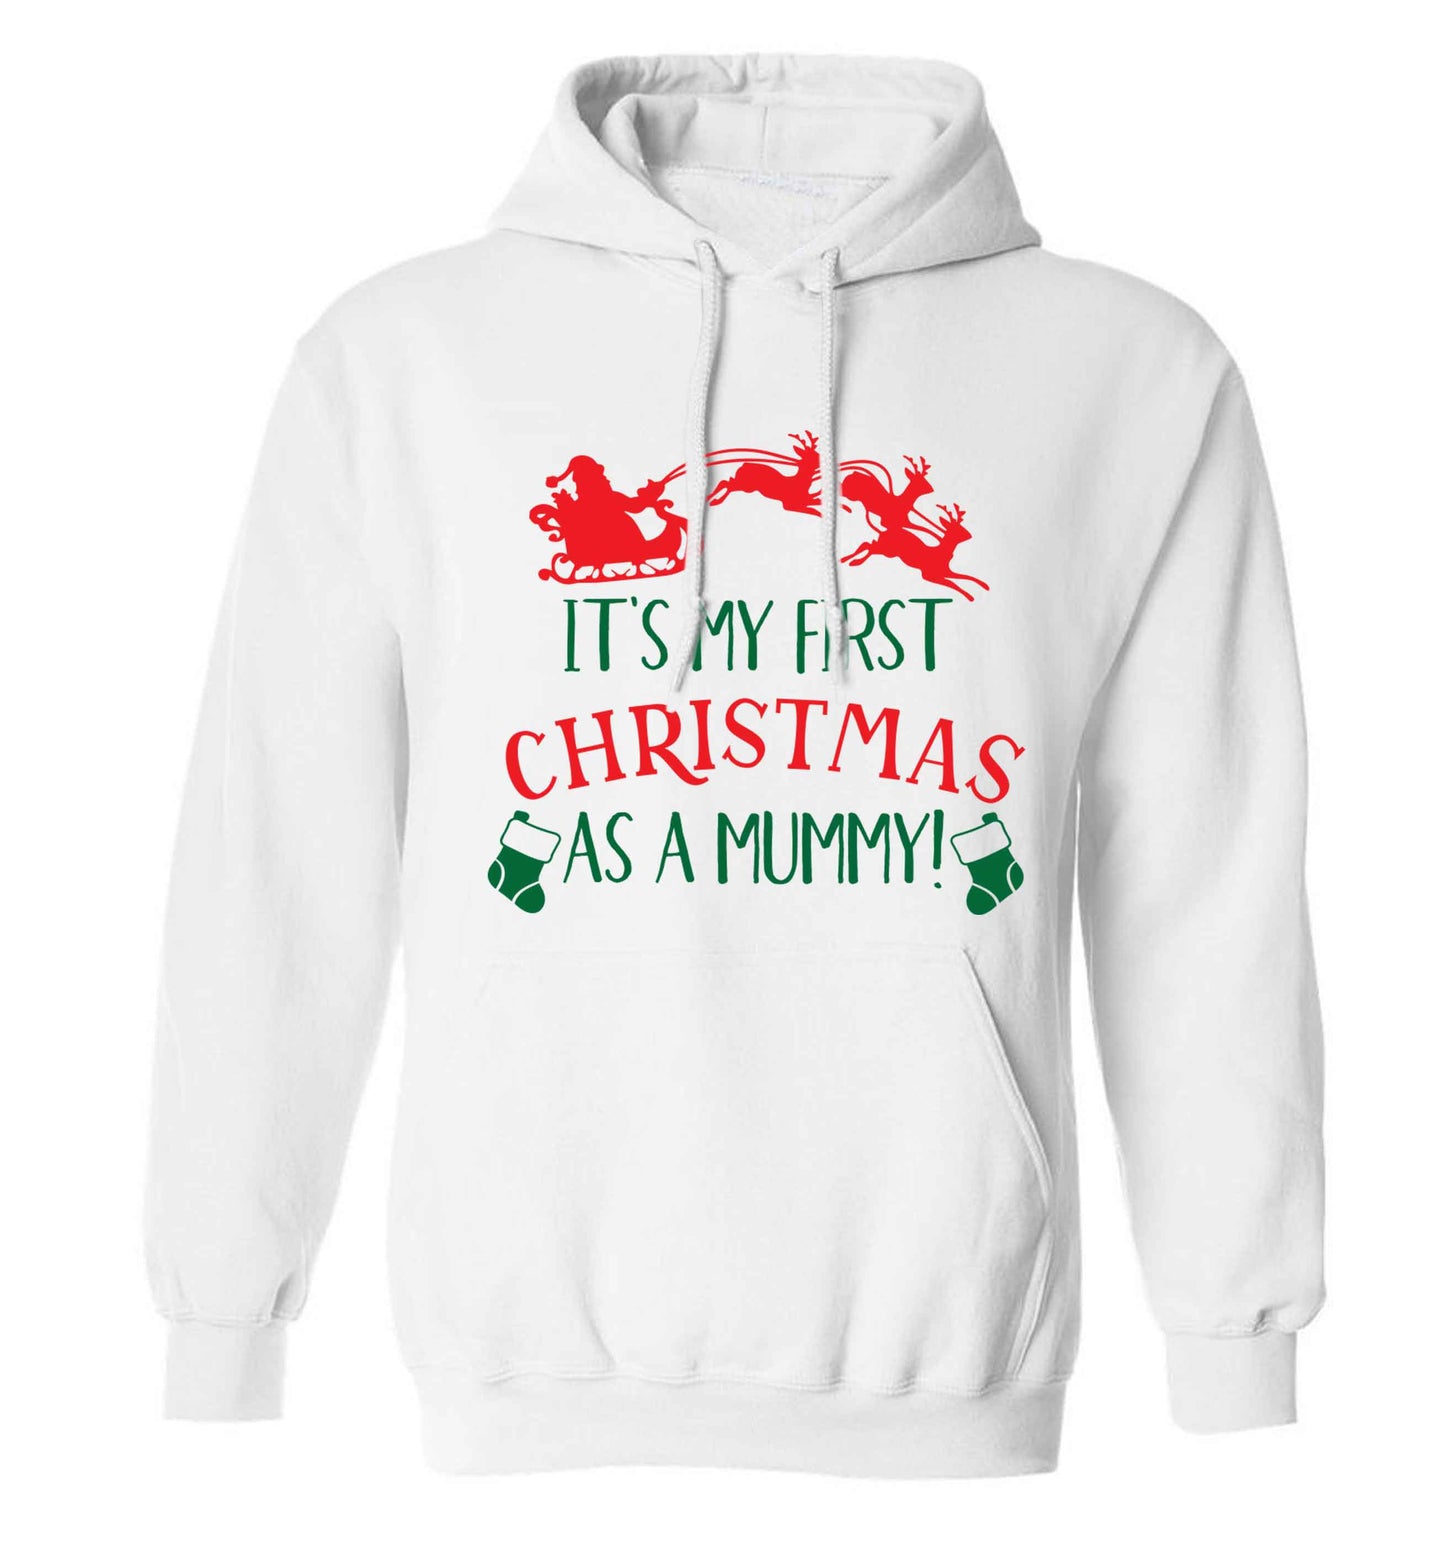 It's my first Christmas as a mummy adults unisex white hoodie 2XL